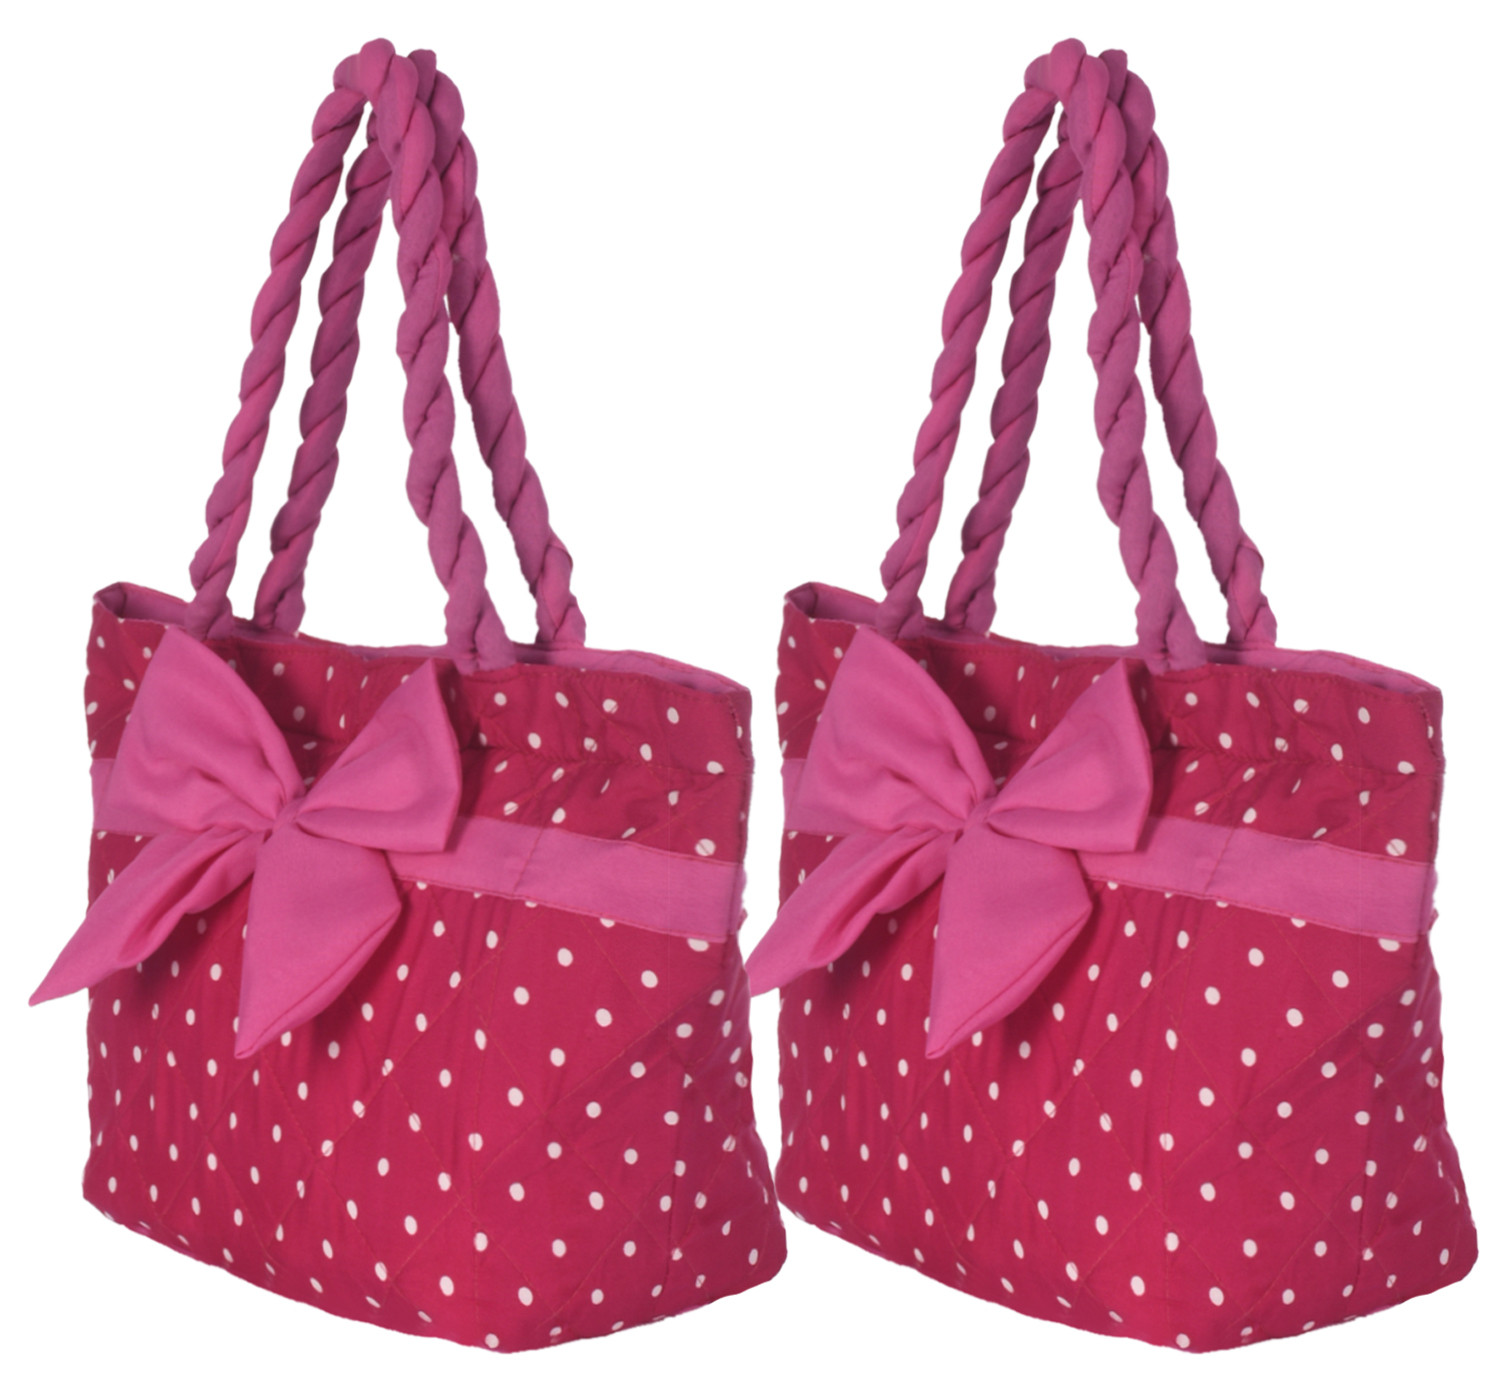 Kuber Industries Dot Print Hand Bag, Bow Bag For Women/Girls With Handle (Pink)